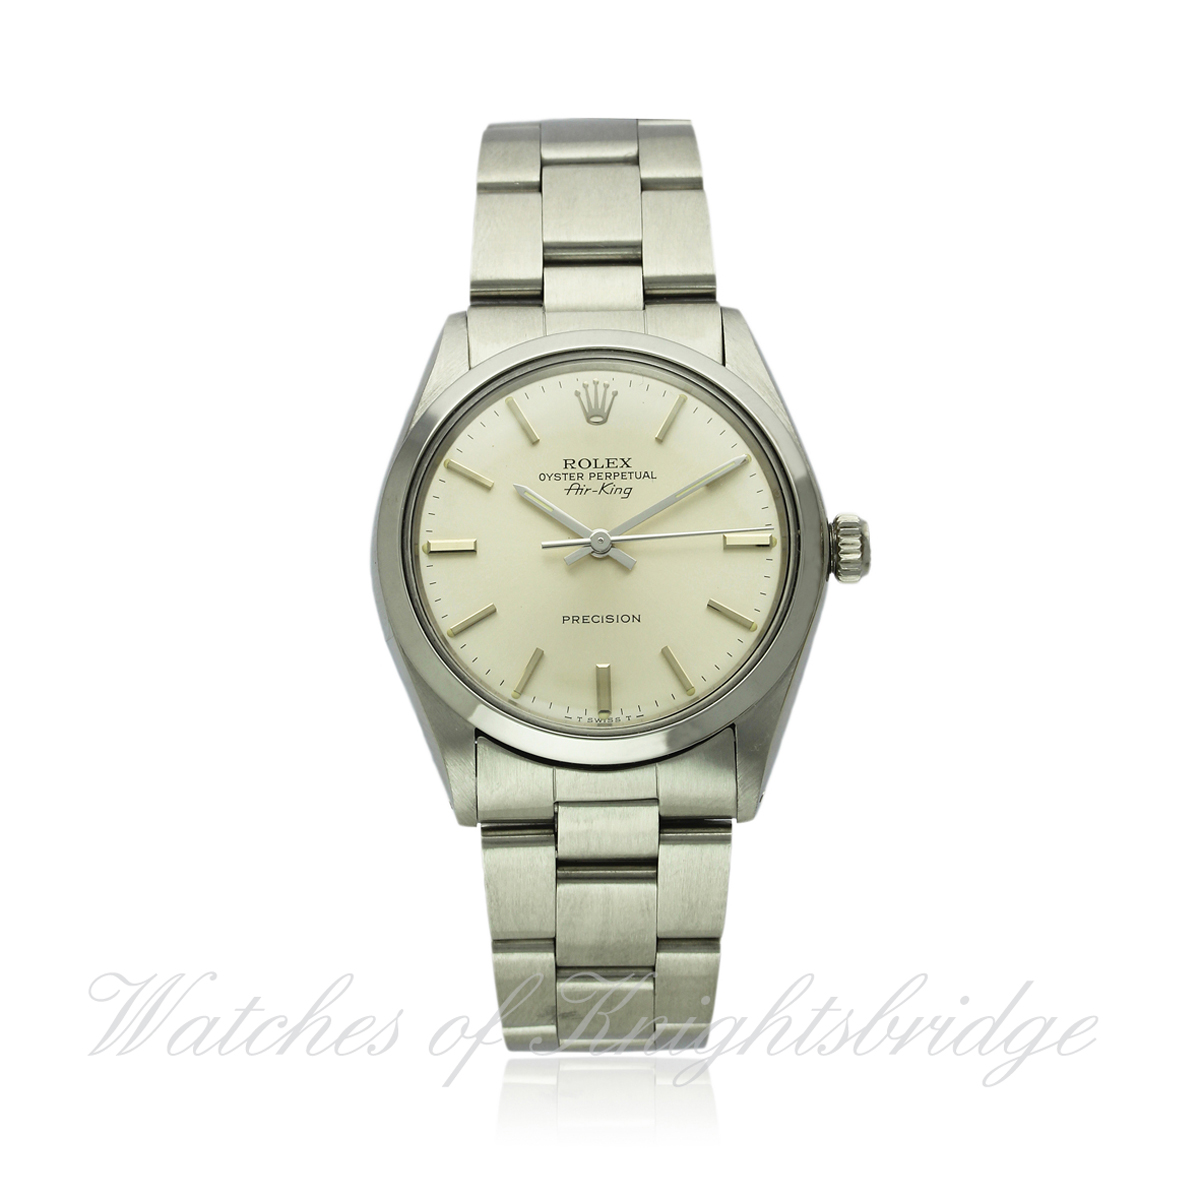 A GENTLEMAN`S STAINLESS STEEL ROLEX OYSTER PERPETUAL AIR KING PRECISION BRACELET WATCH CIRCA 1981,